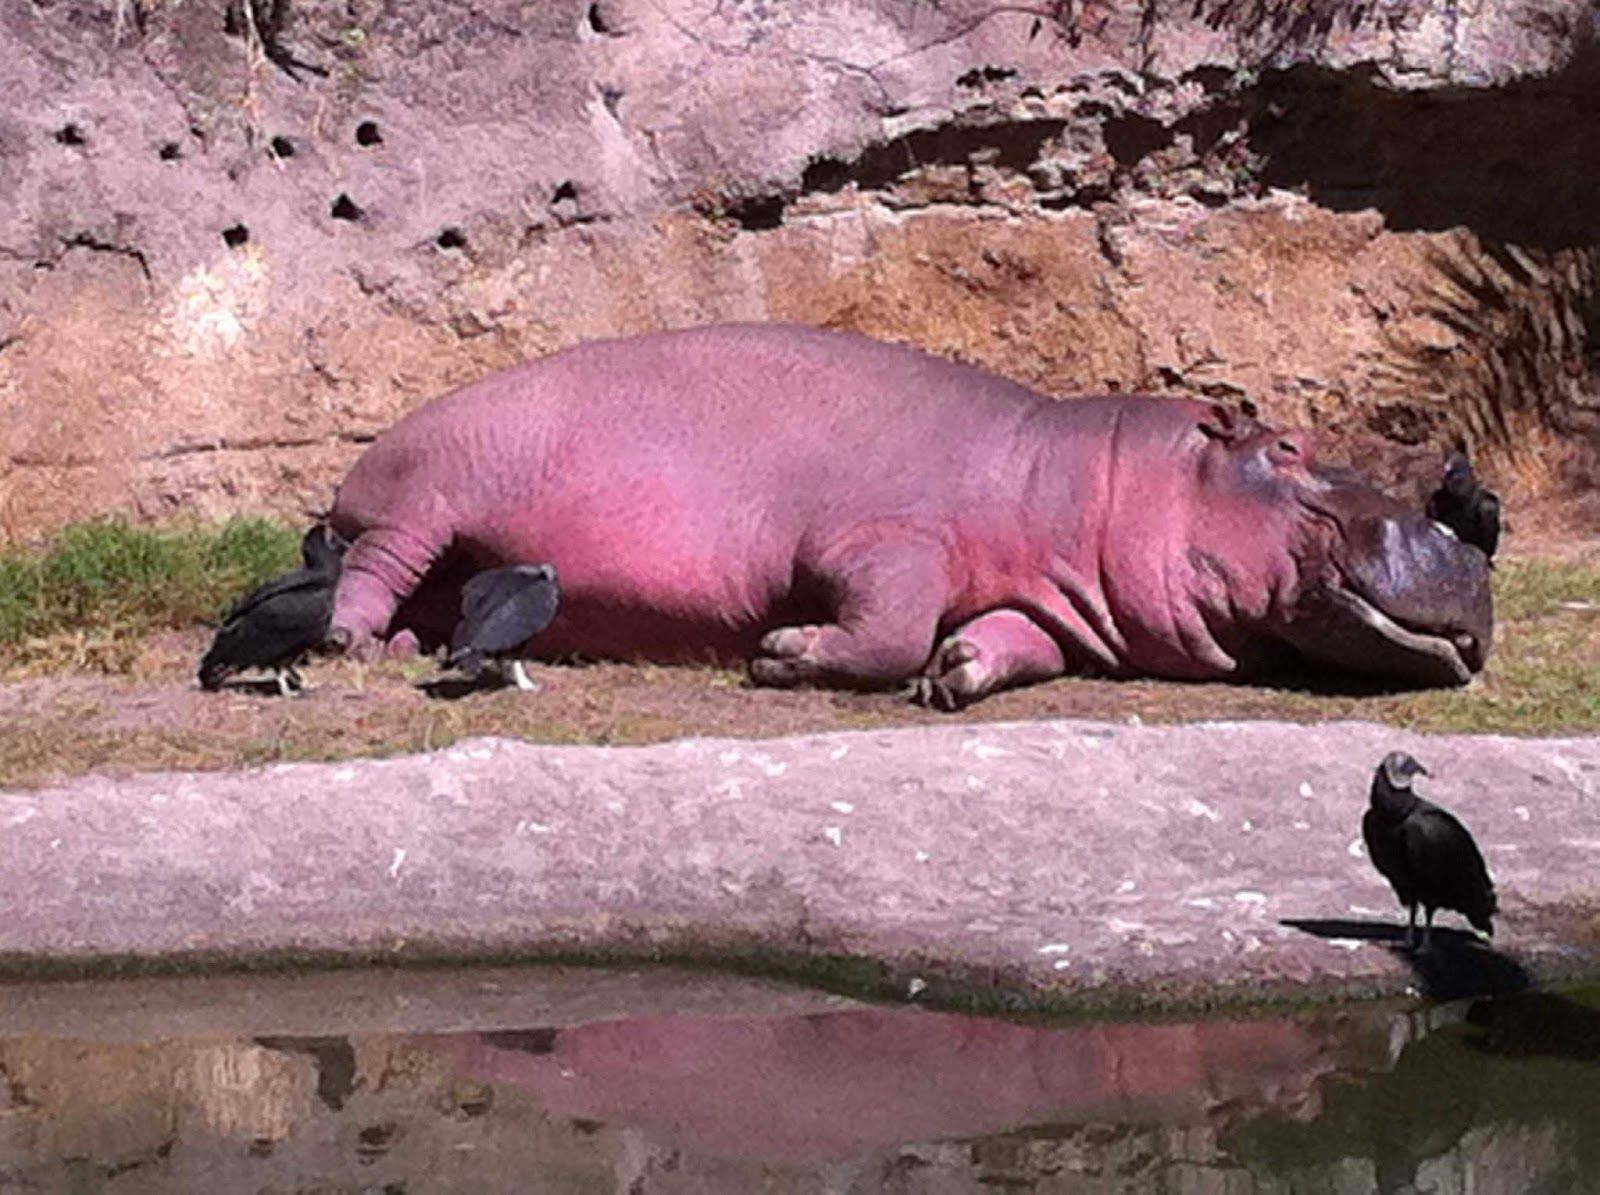 When hippos are upset, their sweat turns red.